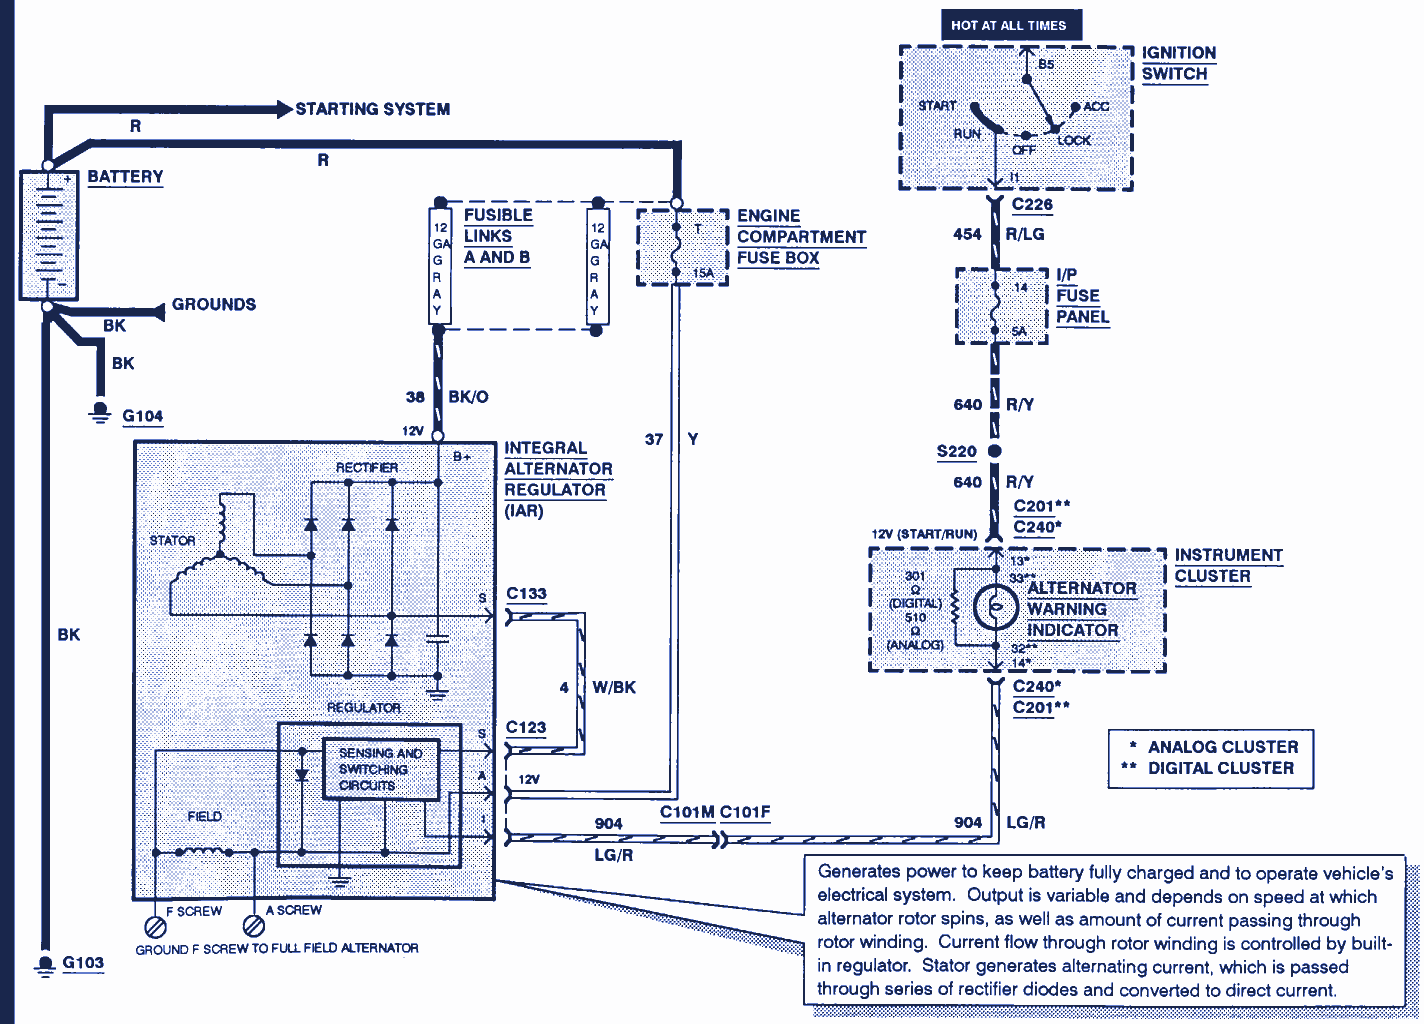 2003 Ford Focus Car Stereo Wiring Diagram from 3.bp.blogspot.com